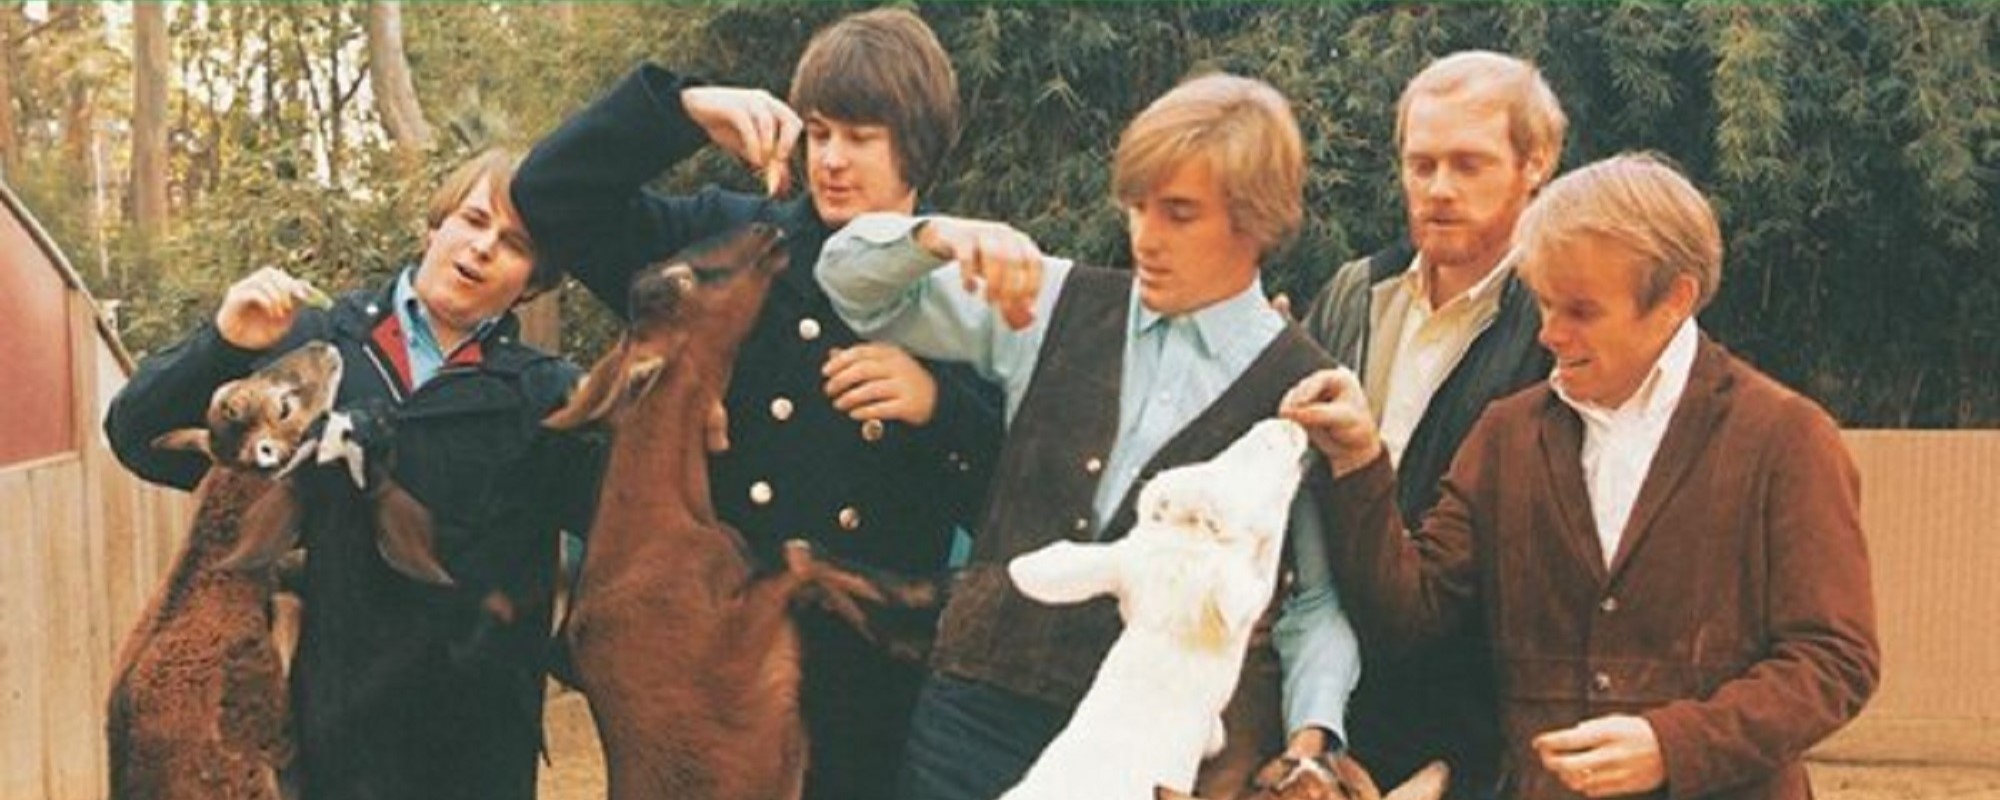 5 Cool Covers of Songs from The Beach Boys’ ‘Pet Sounds’ in Honor of the 1966 Album’s Anniversary